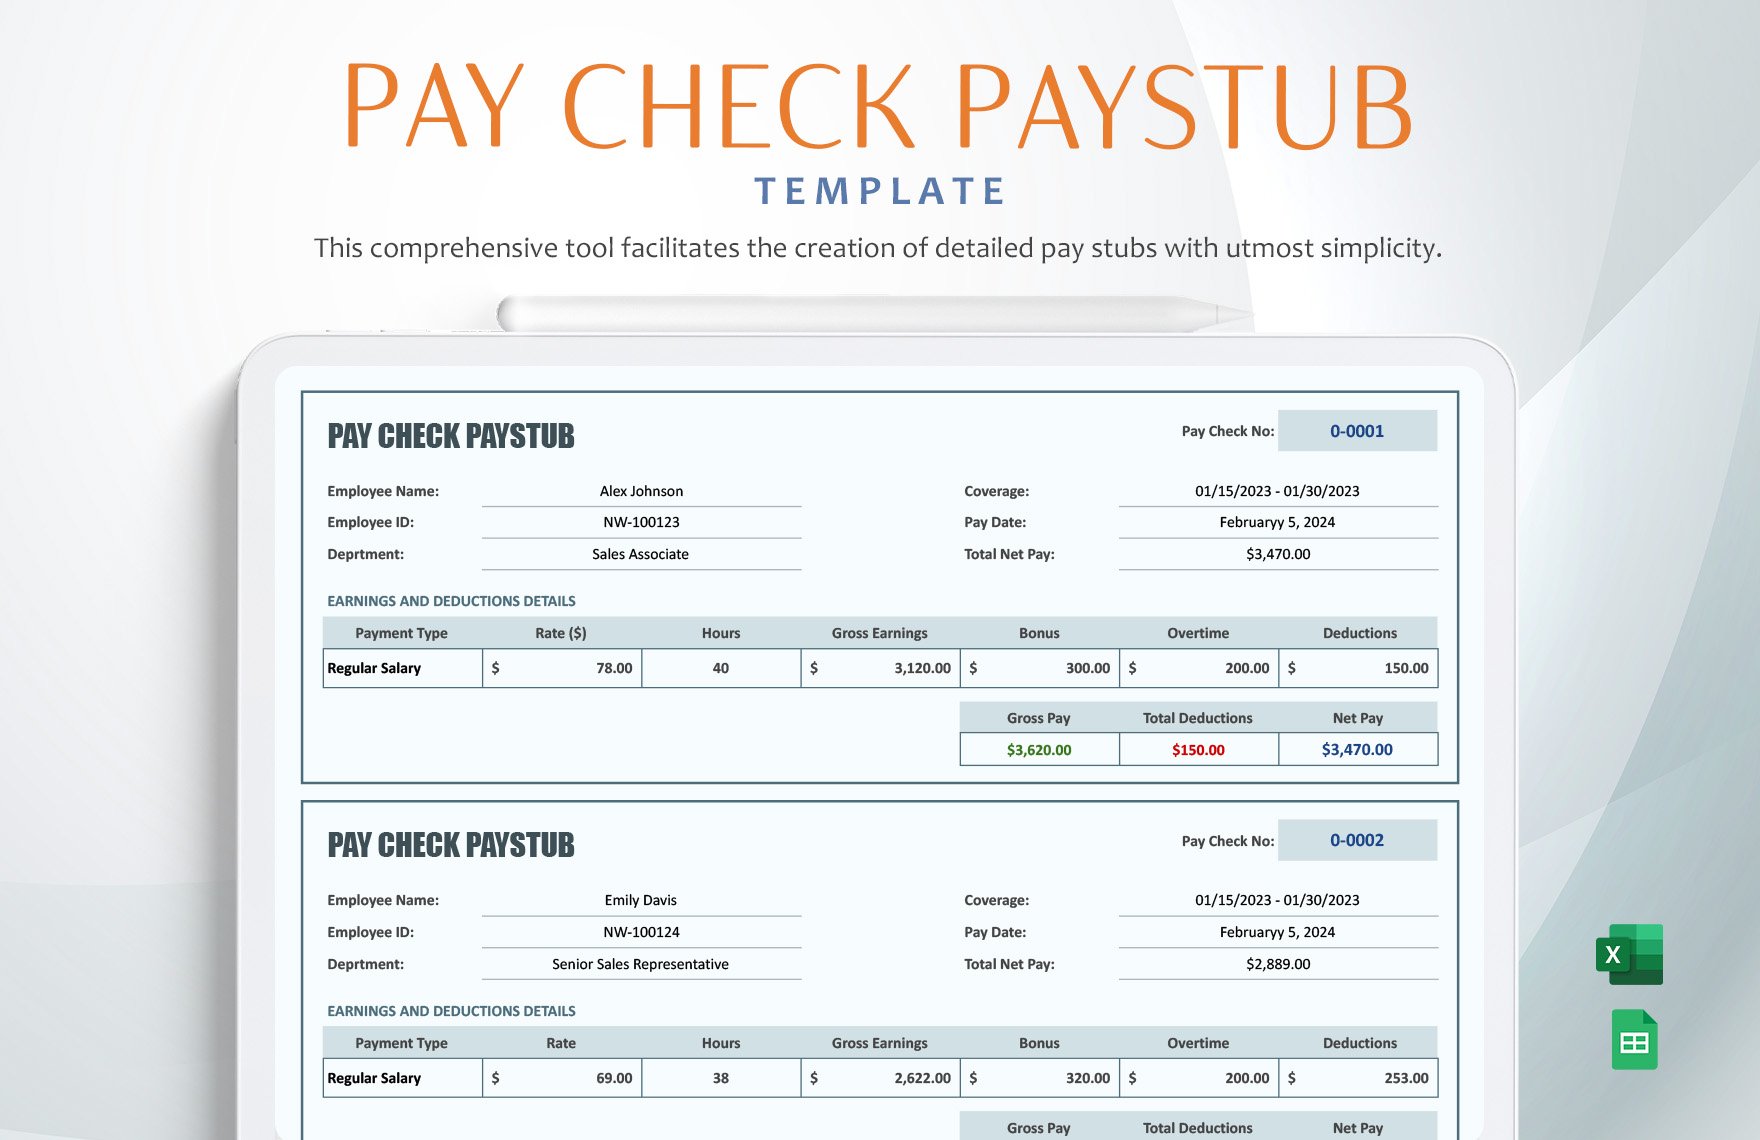 Pay Check Paystub Template in Excel, Google Sheets